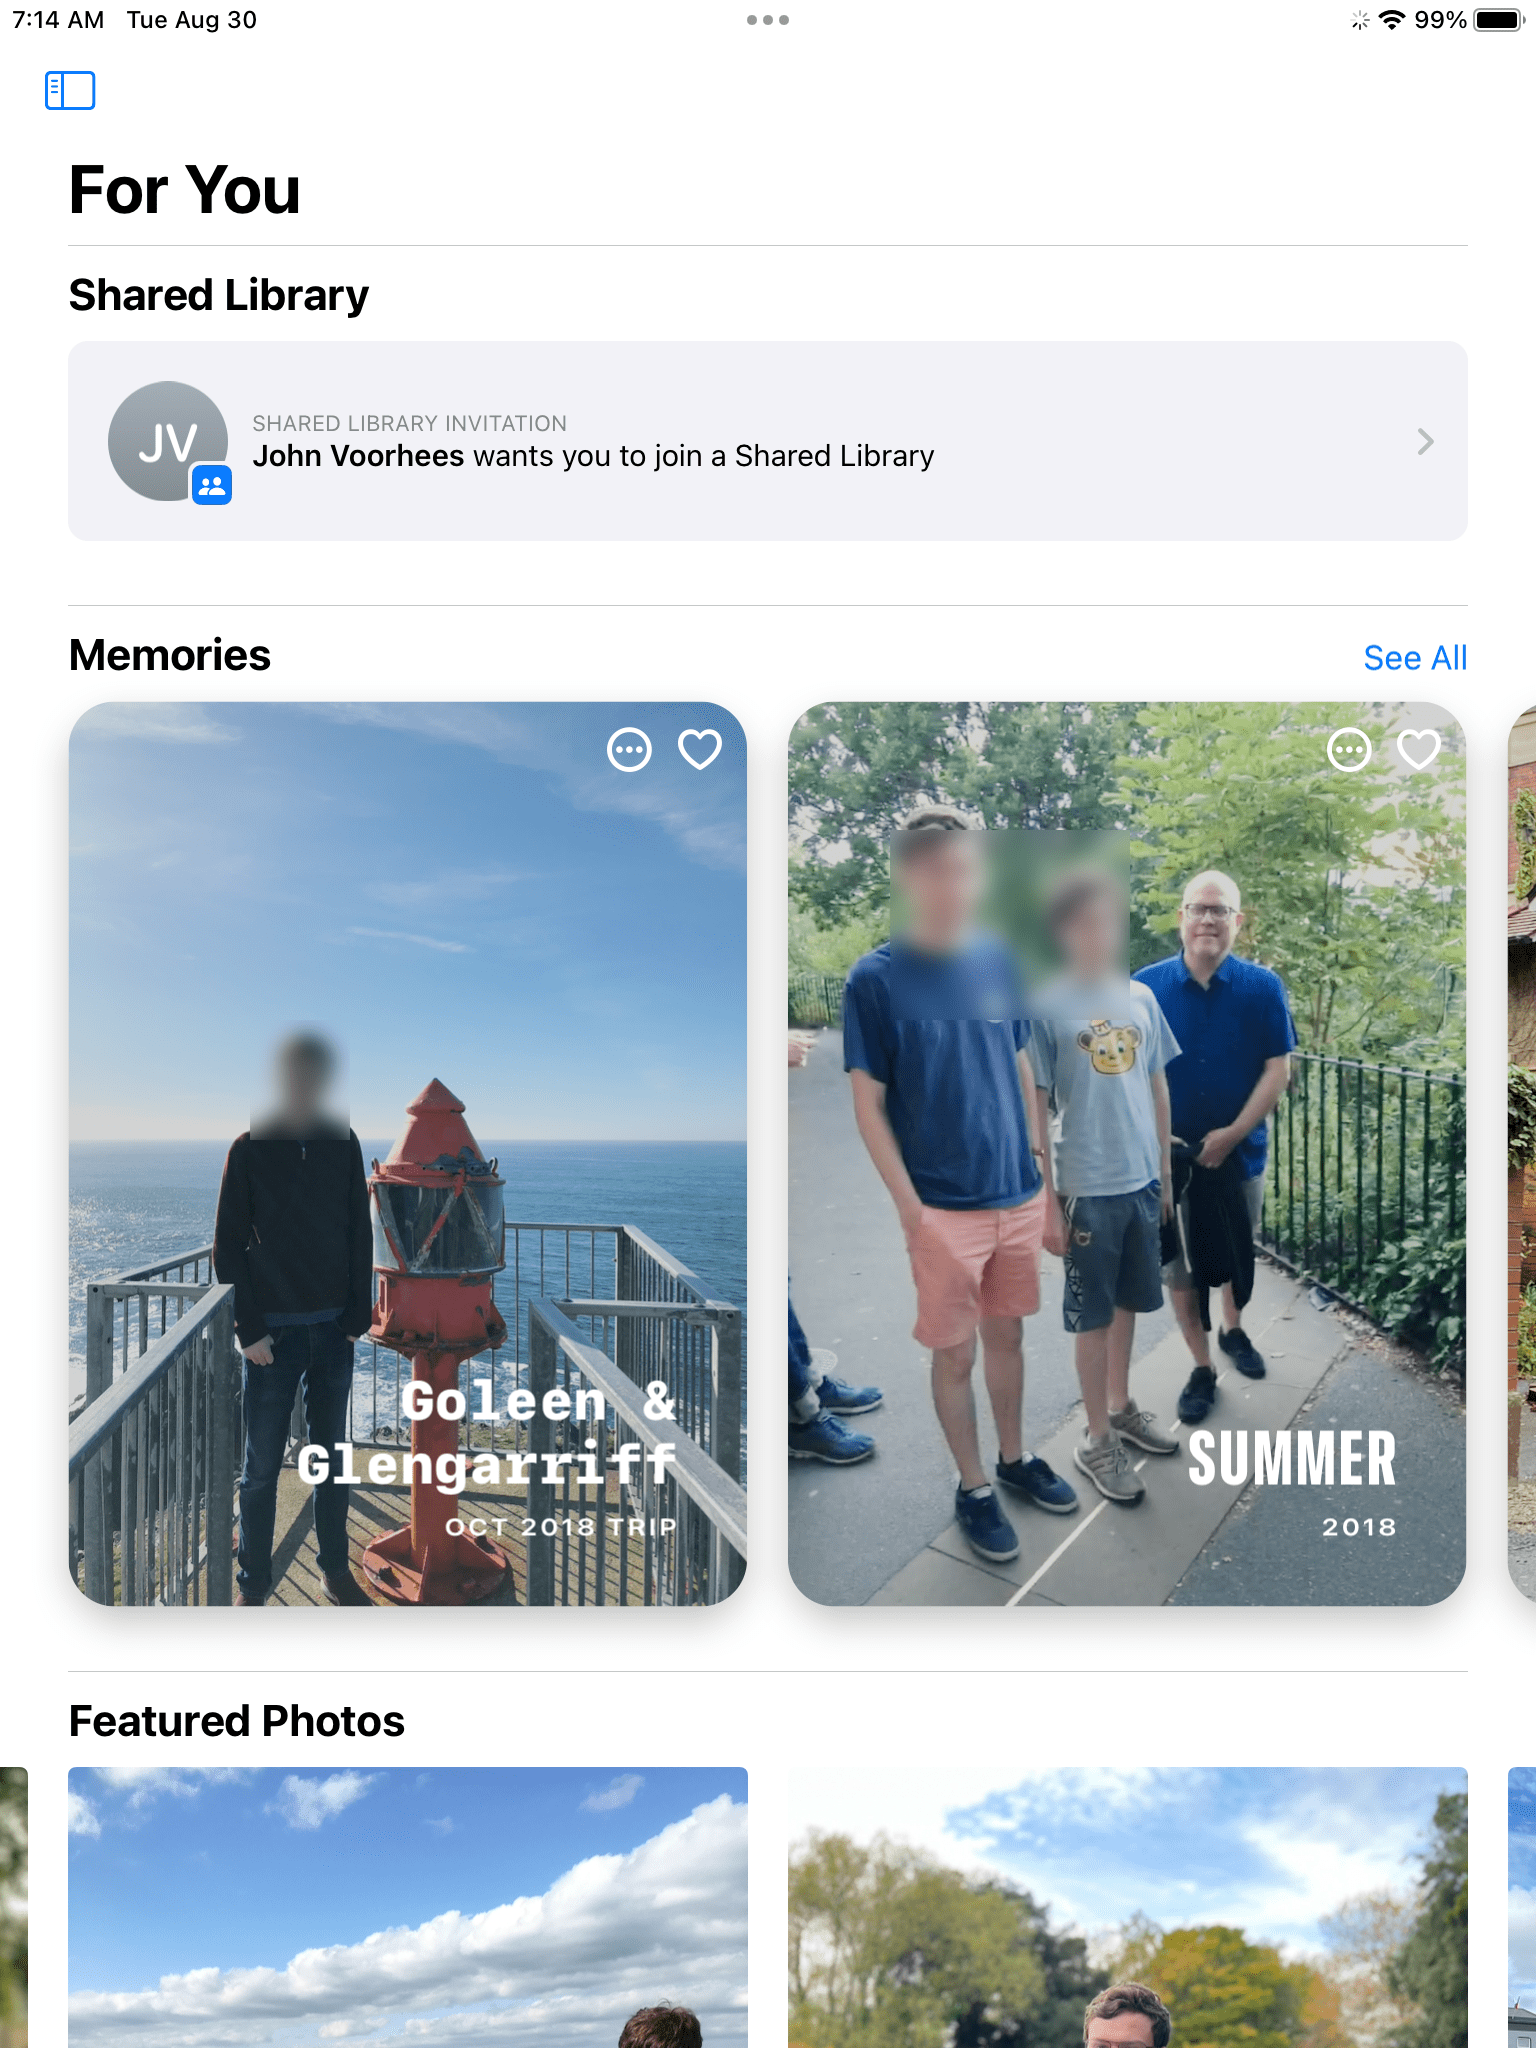 The invitation to a shared library shows up in the For You section of Photos.